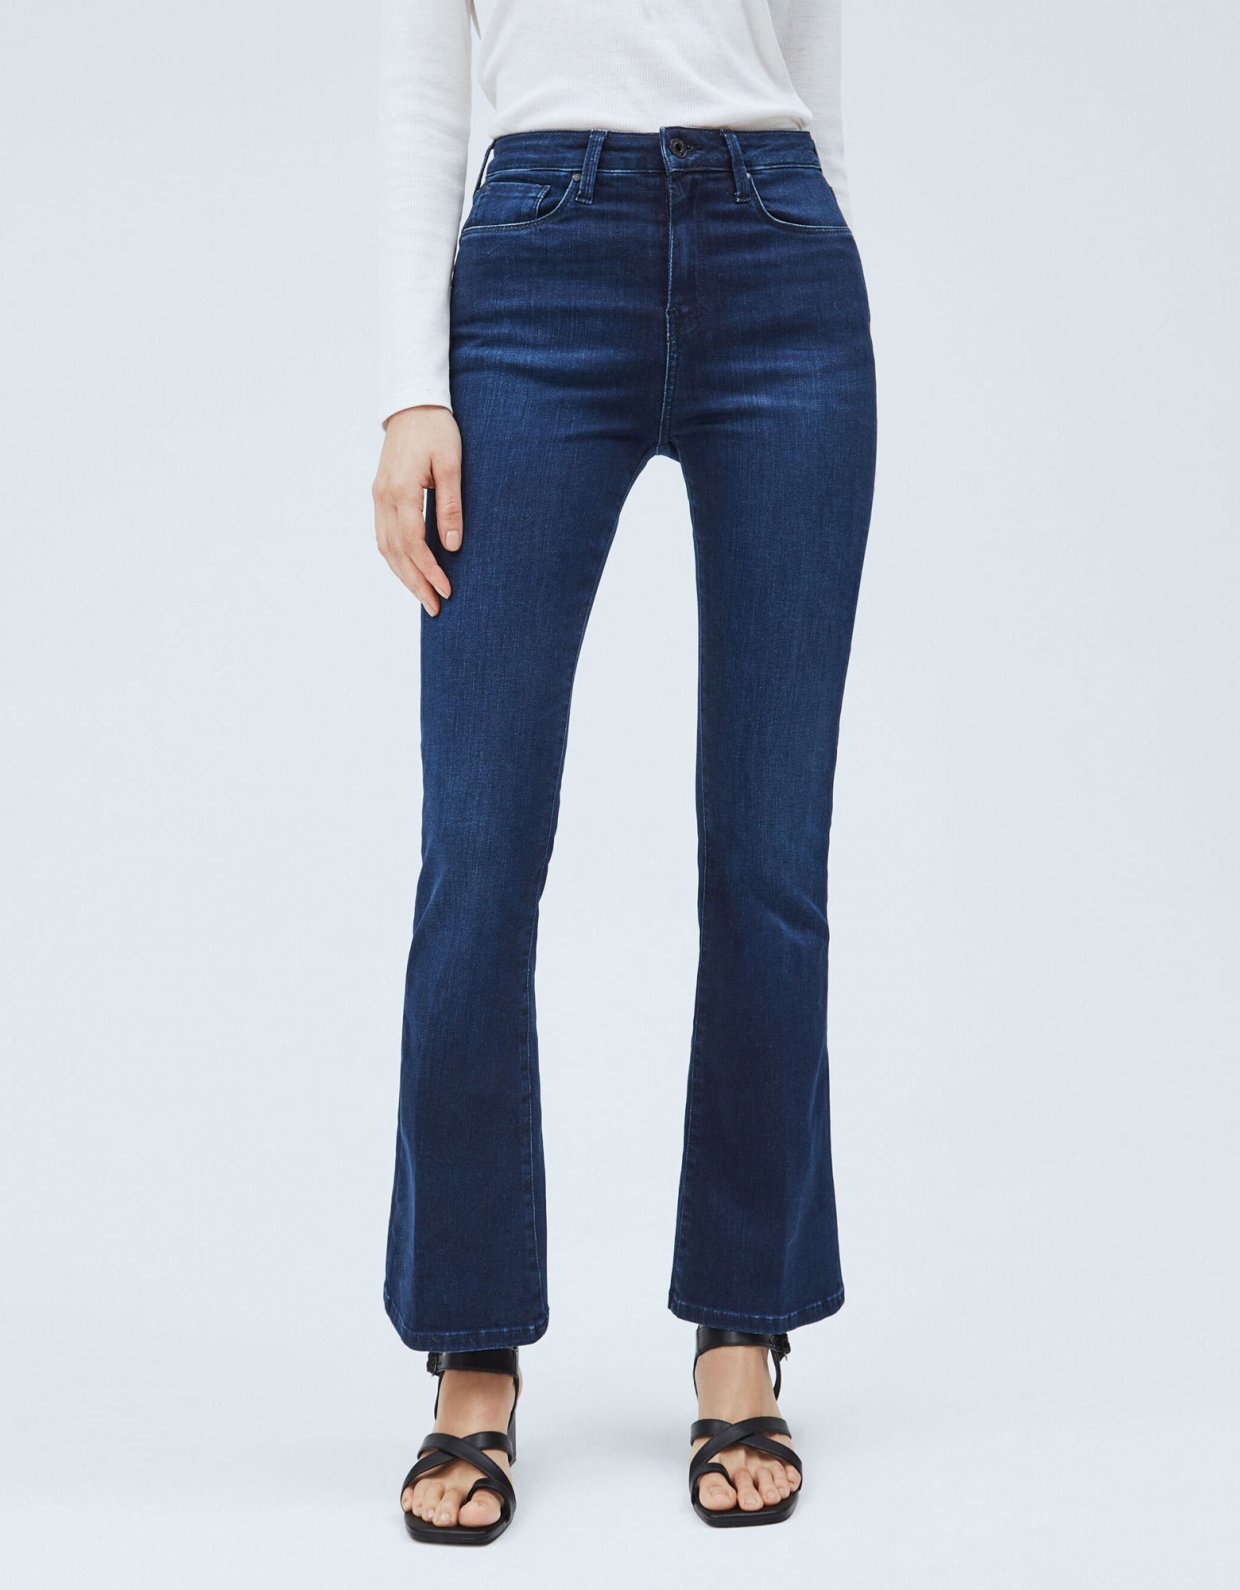 Pepe Jeans Dion flare high-waist jeans